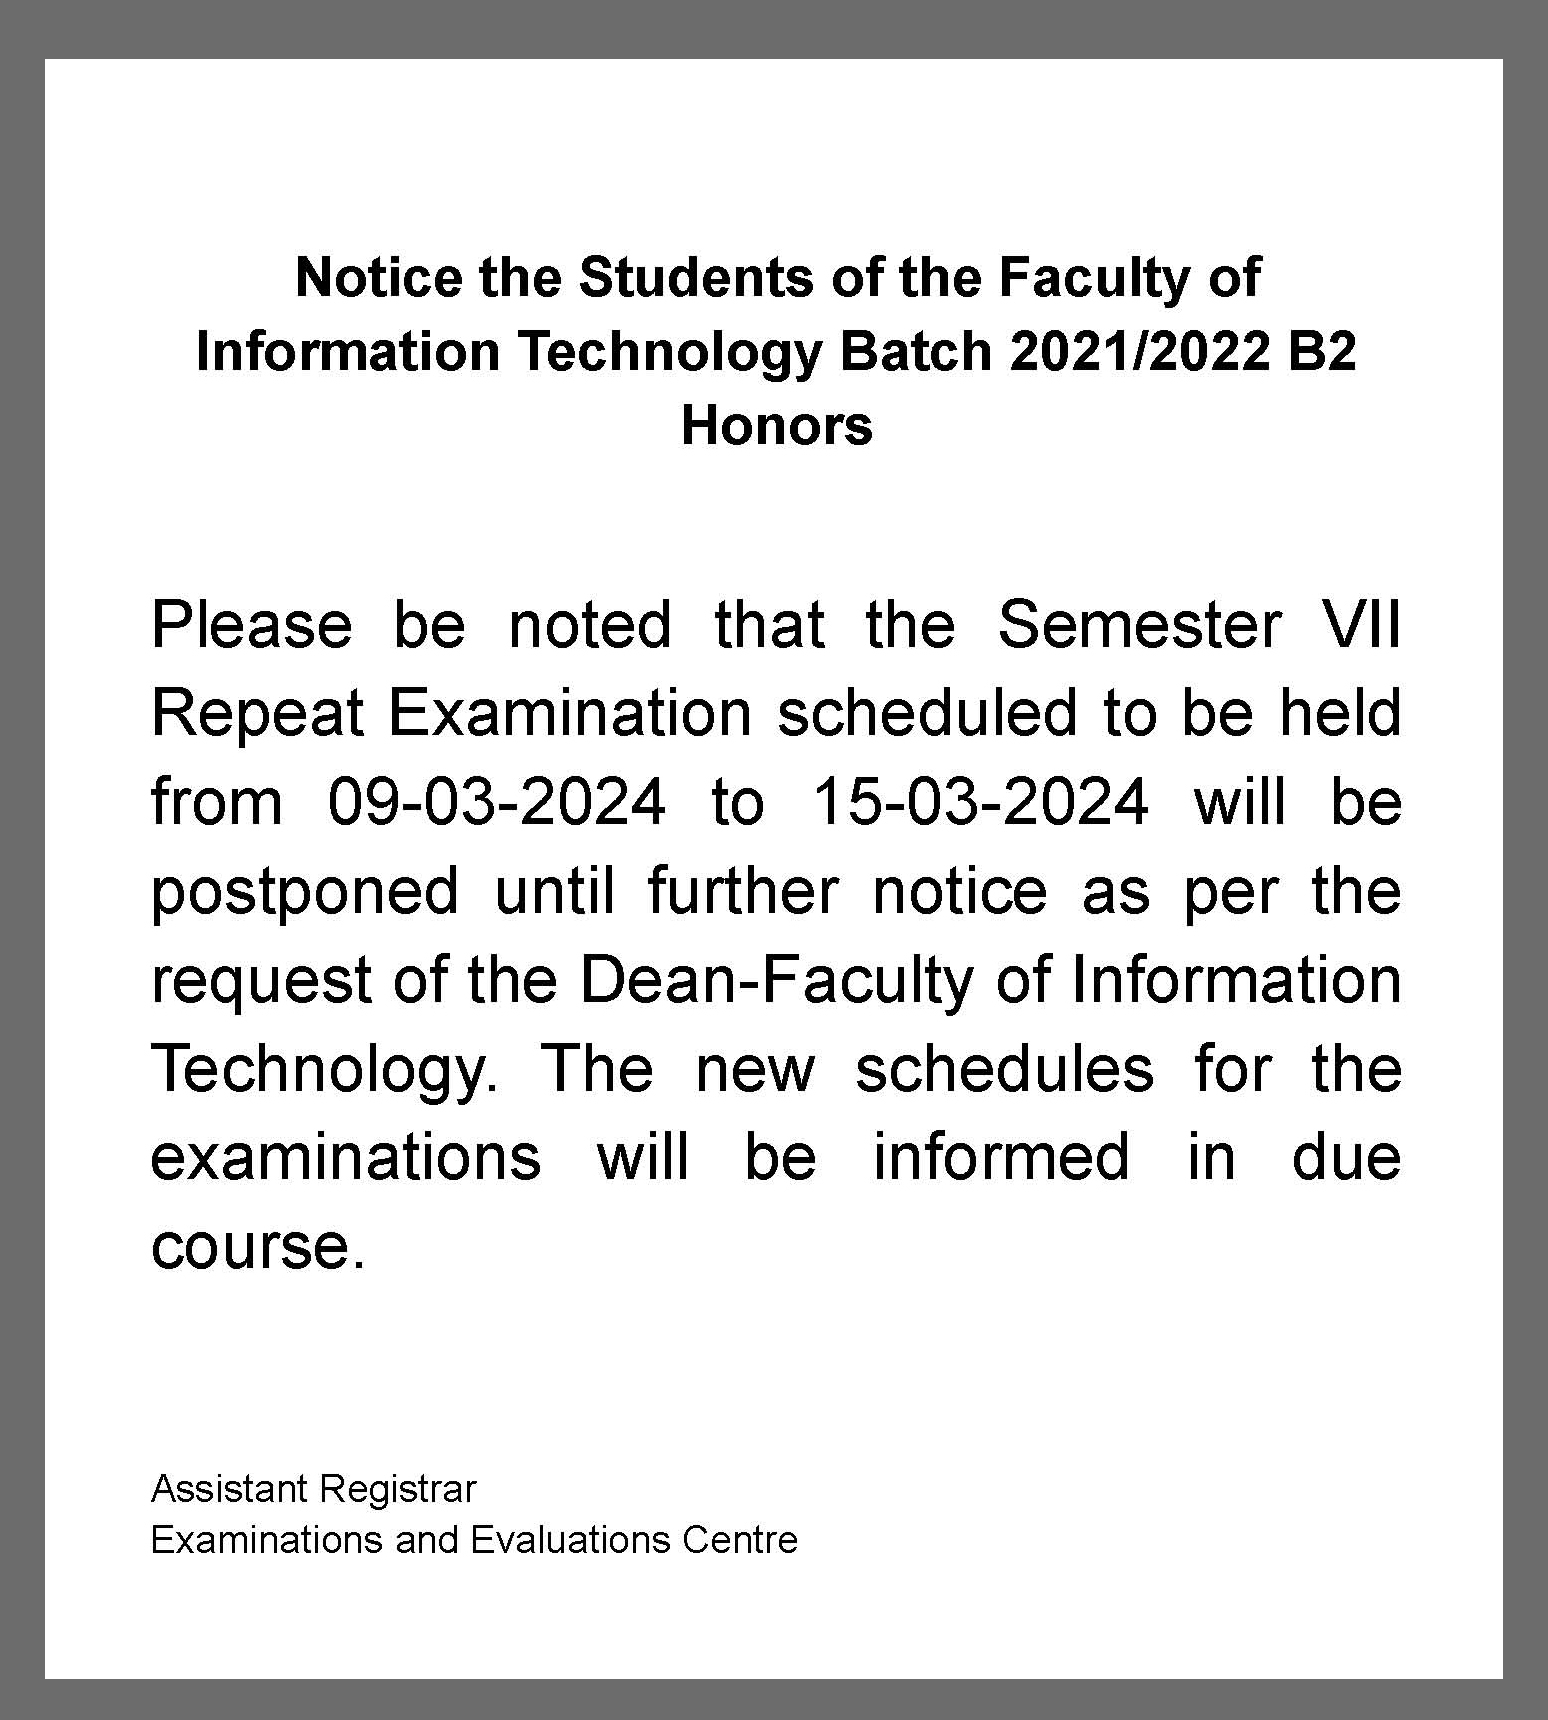 notice-the-students-of-the-faculty-of-information-technology-batch-2021